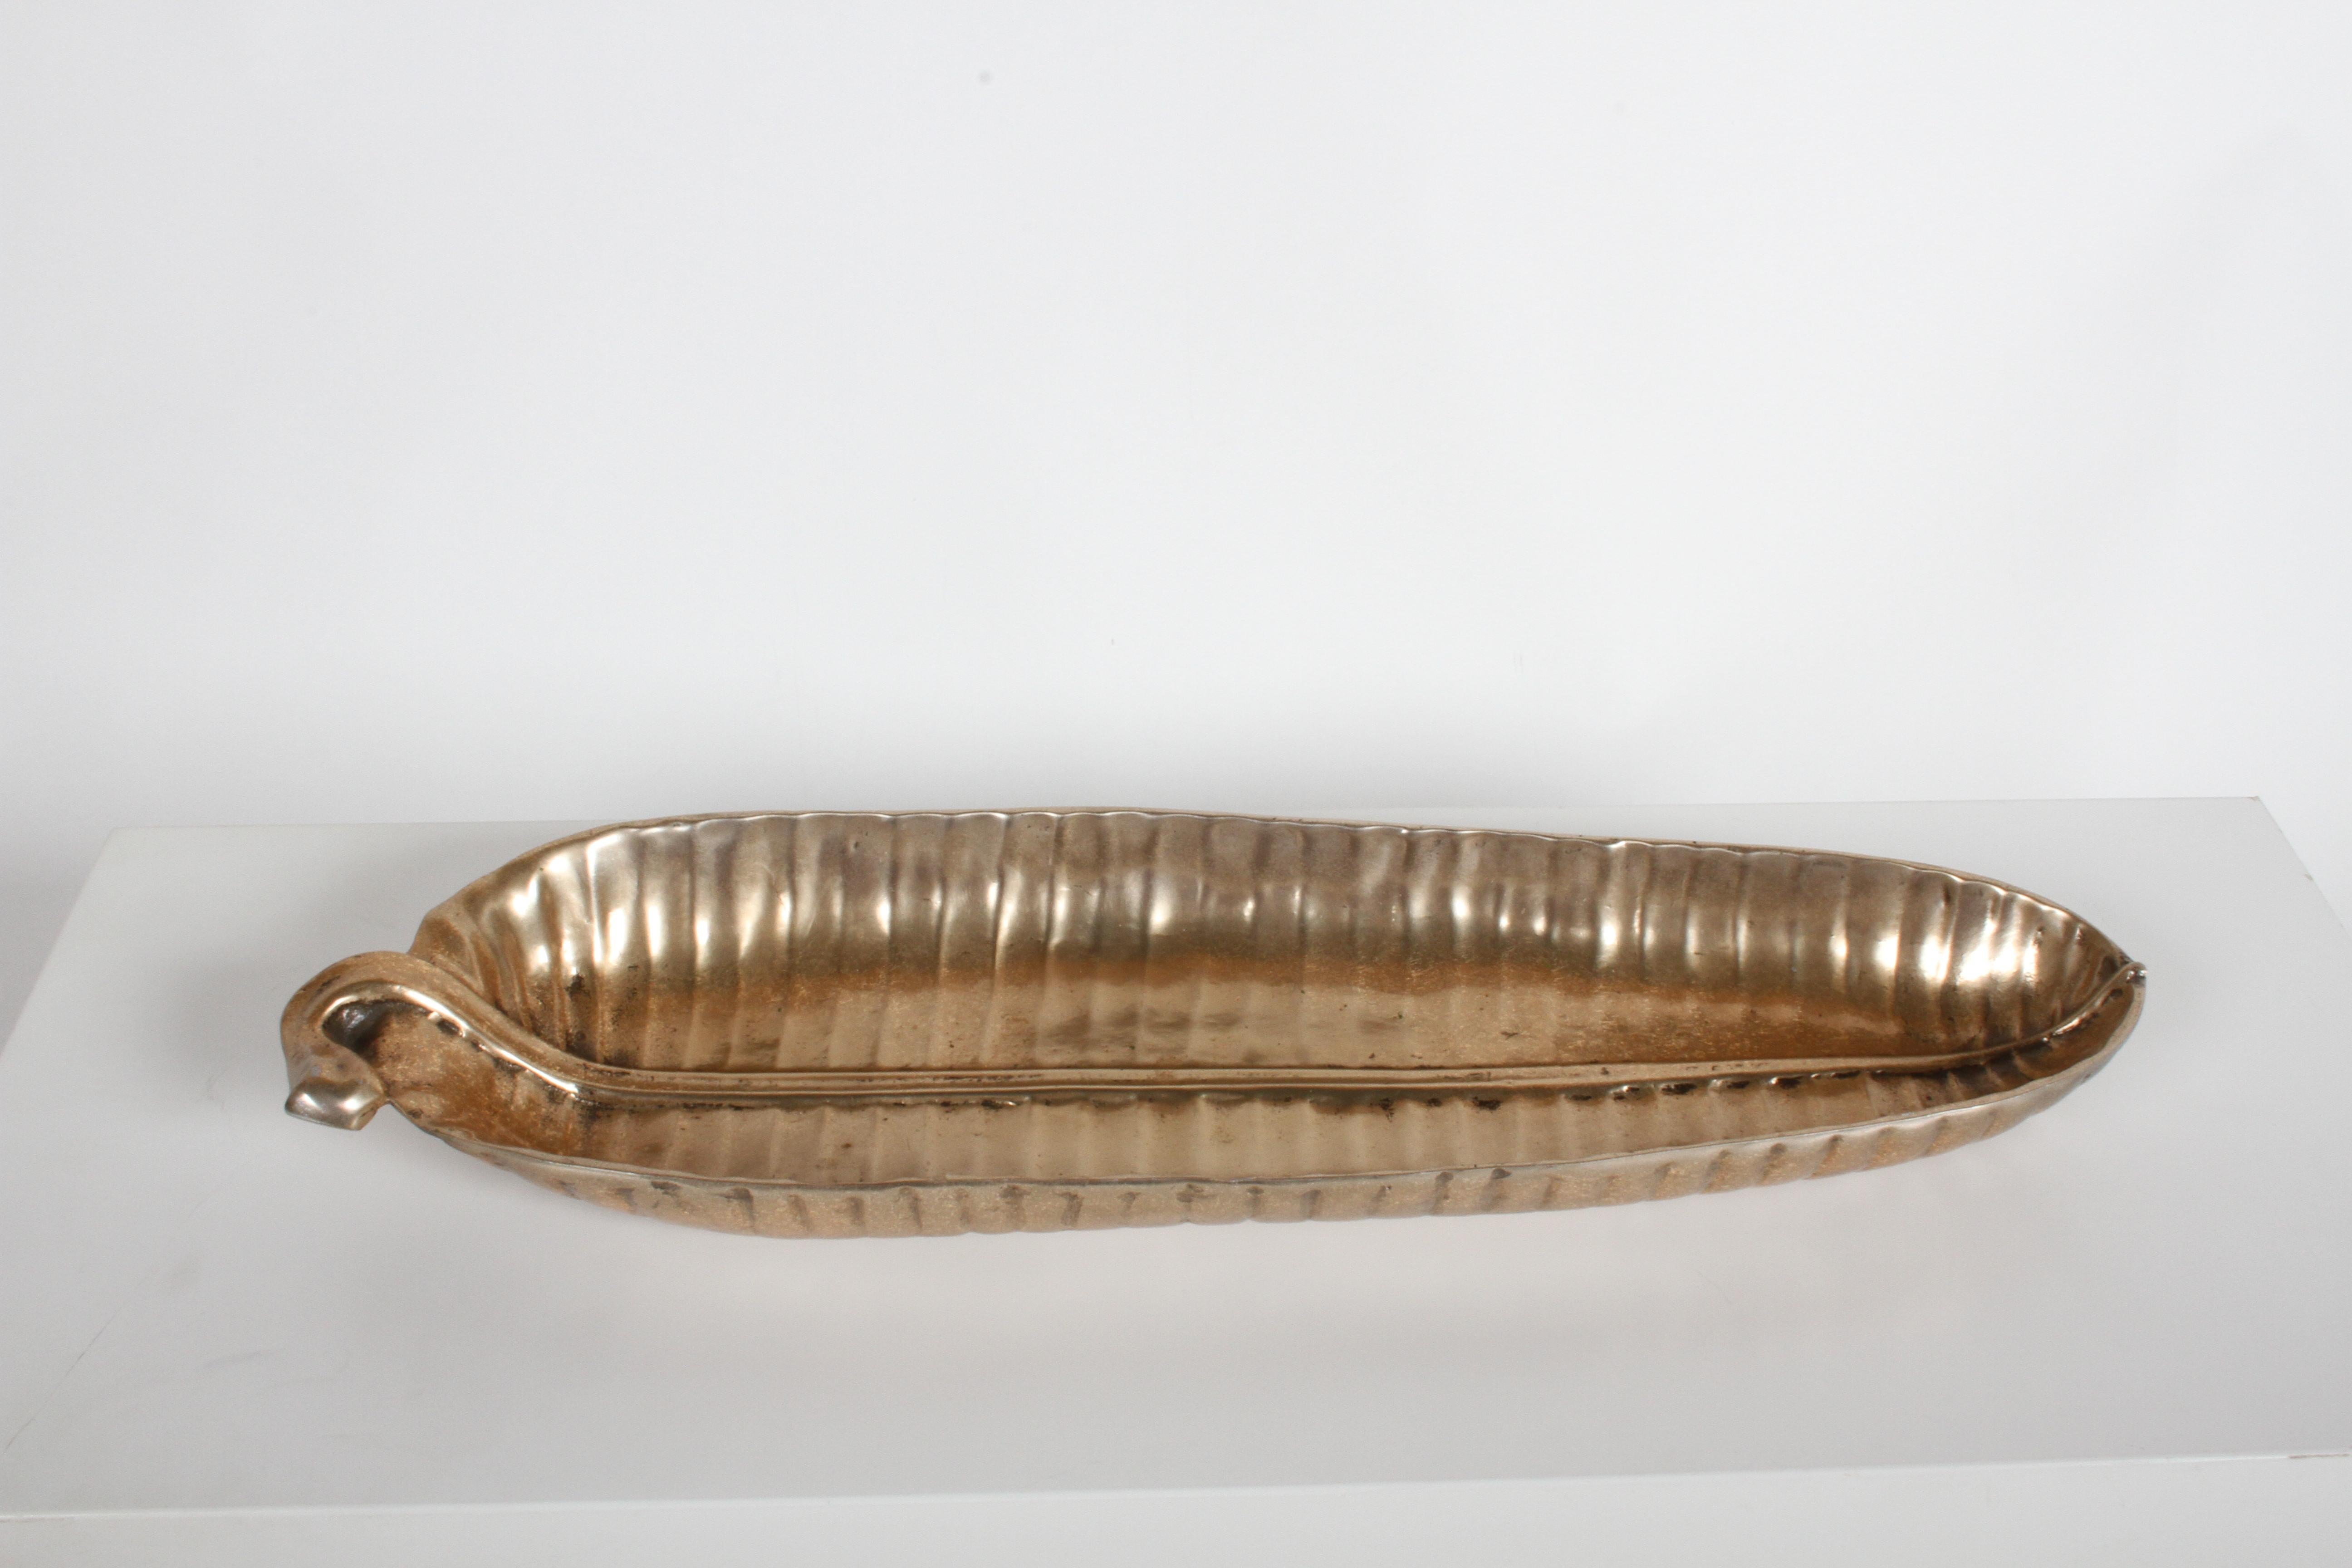 Early 1950s Bruce Fox Designs of a large banana leaf serving bowl, with unusual gold tone over the aluminum. Signed on verso. 

From St. Louis Modernist Architect Meyer Loomstein's estate. 